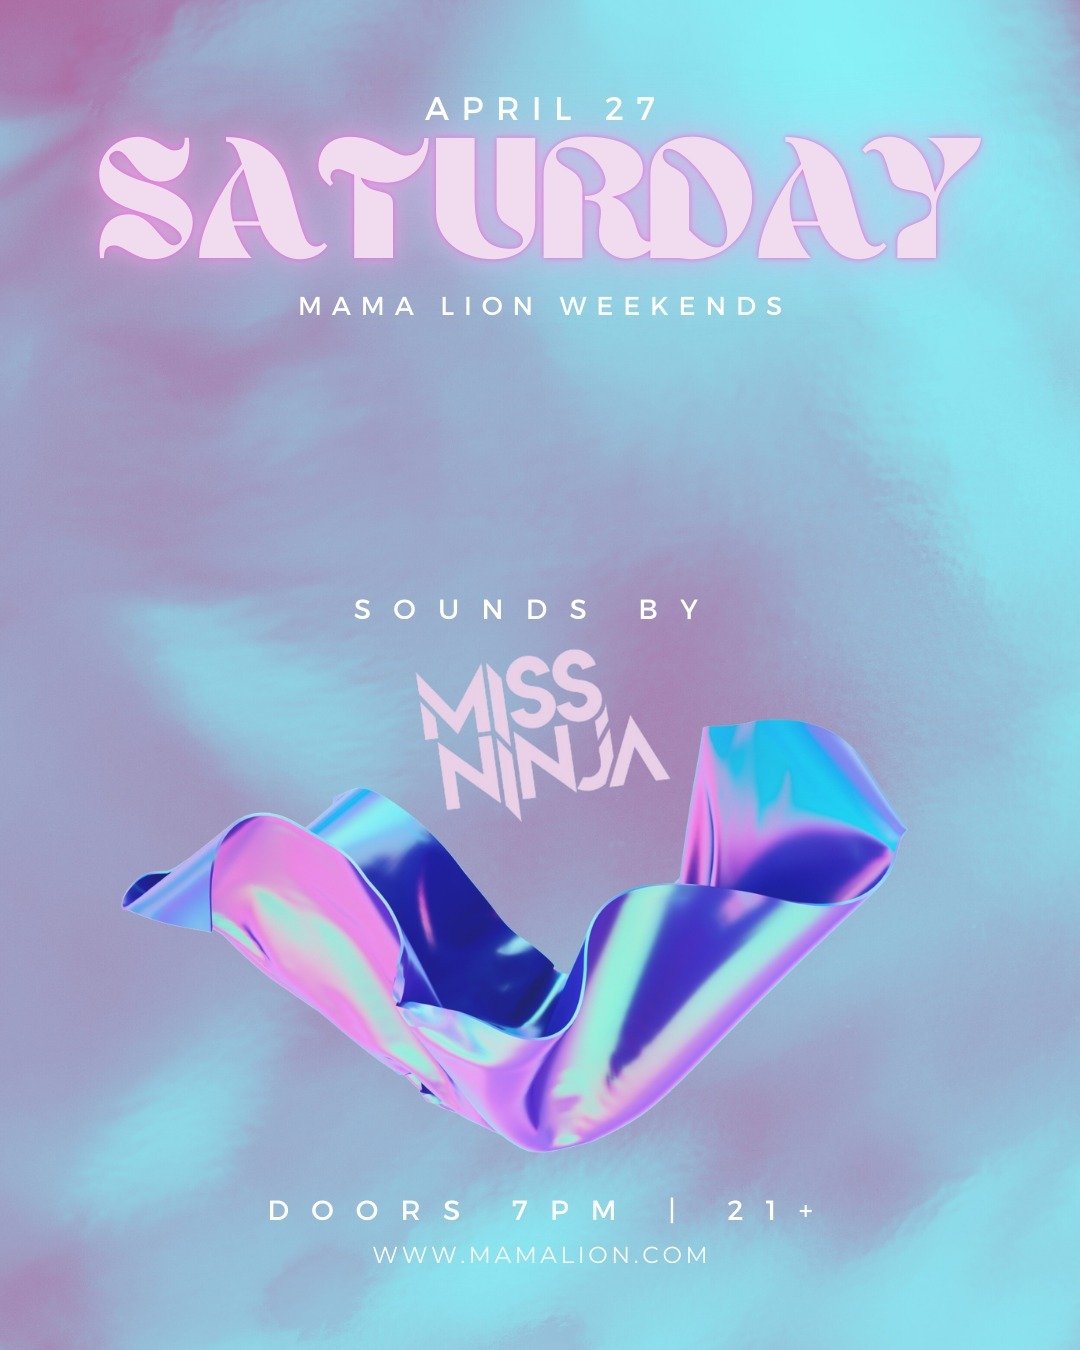 Currently at my desk, mentally fast forwarding to Saturday night with @djmissninja at #mamalion 💆☁️

Doors 7pm
More Info on www.mamalion.com 

#lanightlife #koreatownla #labars